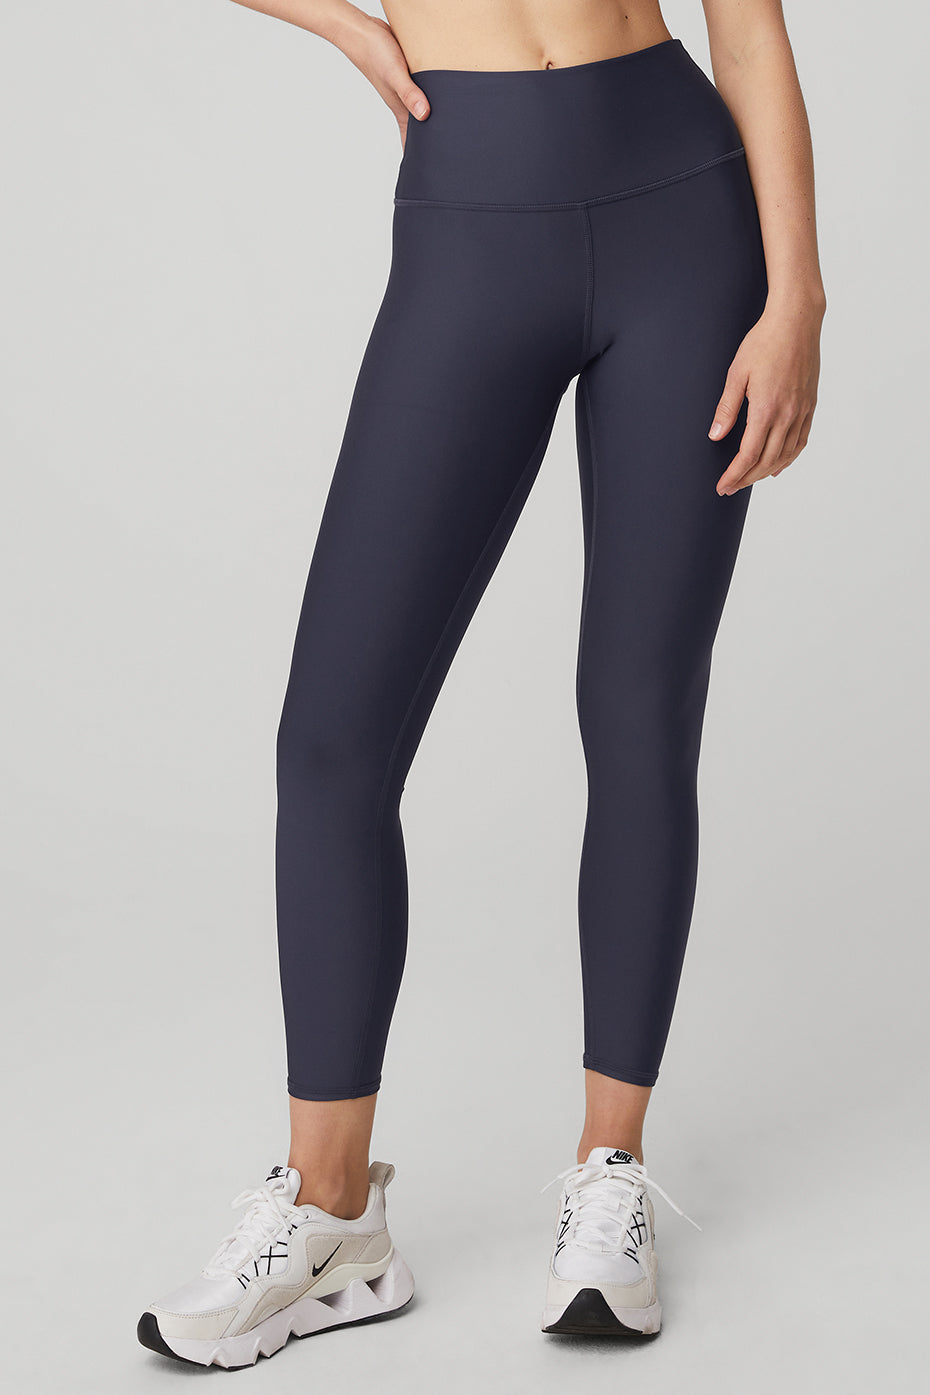 7/8 High-Waist Airlift Legging in True Navy by Alo Yoga